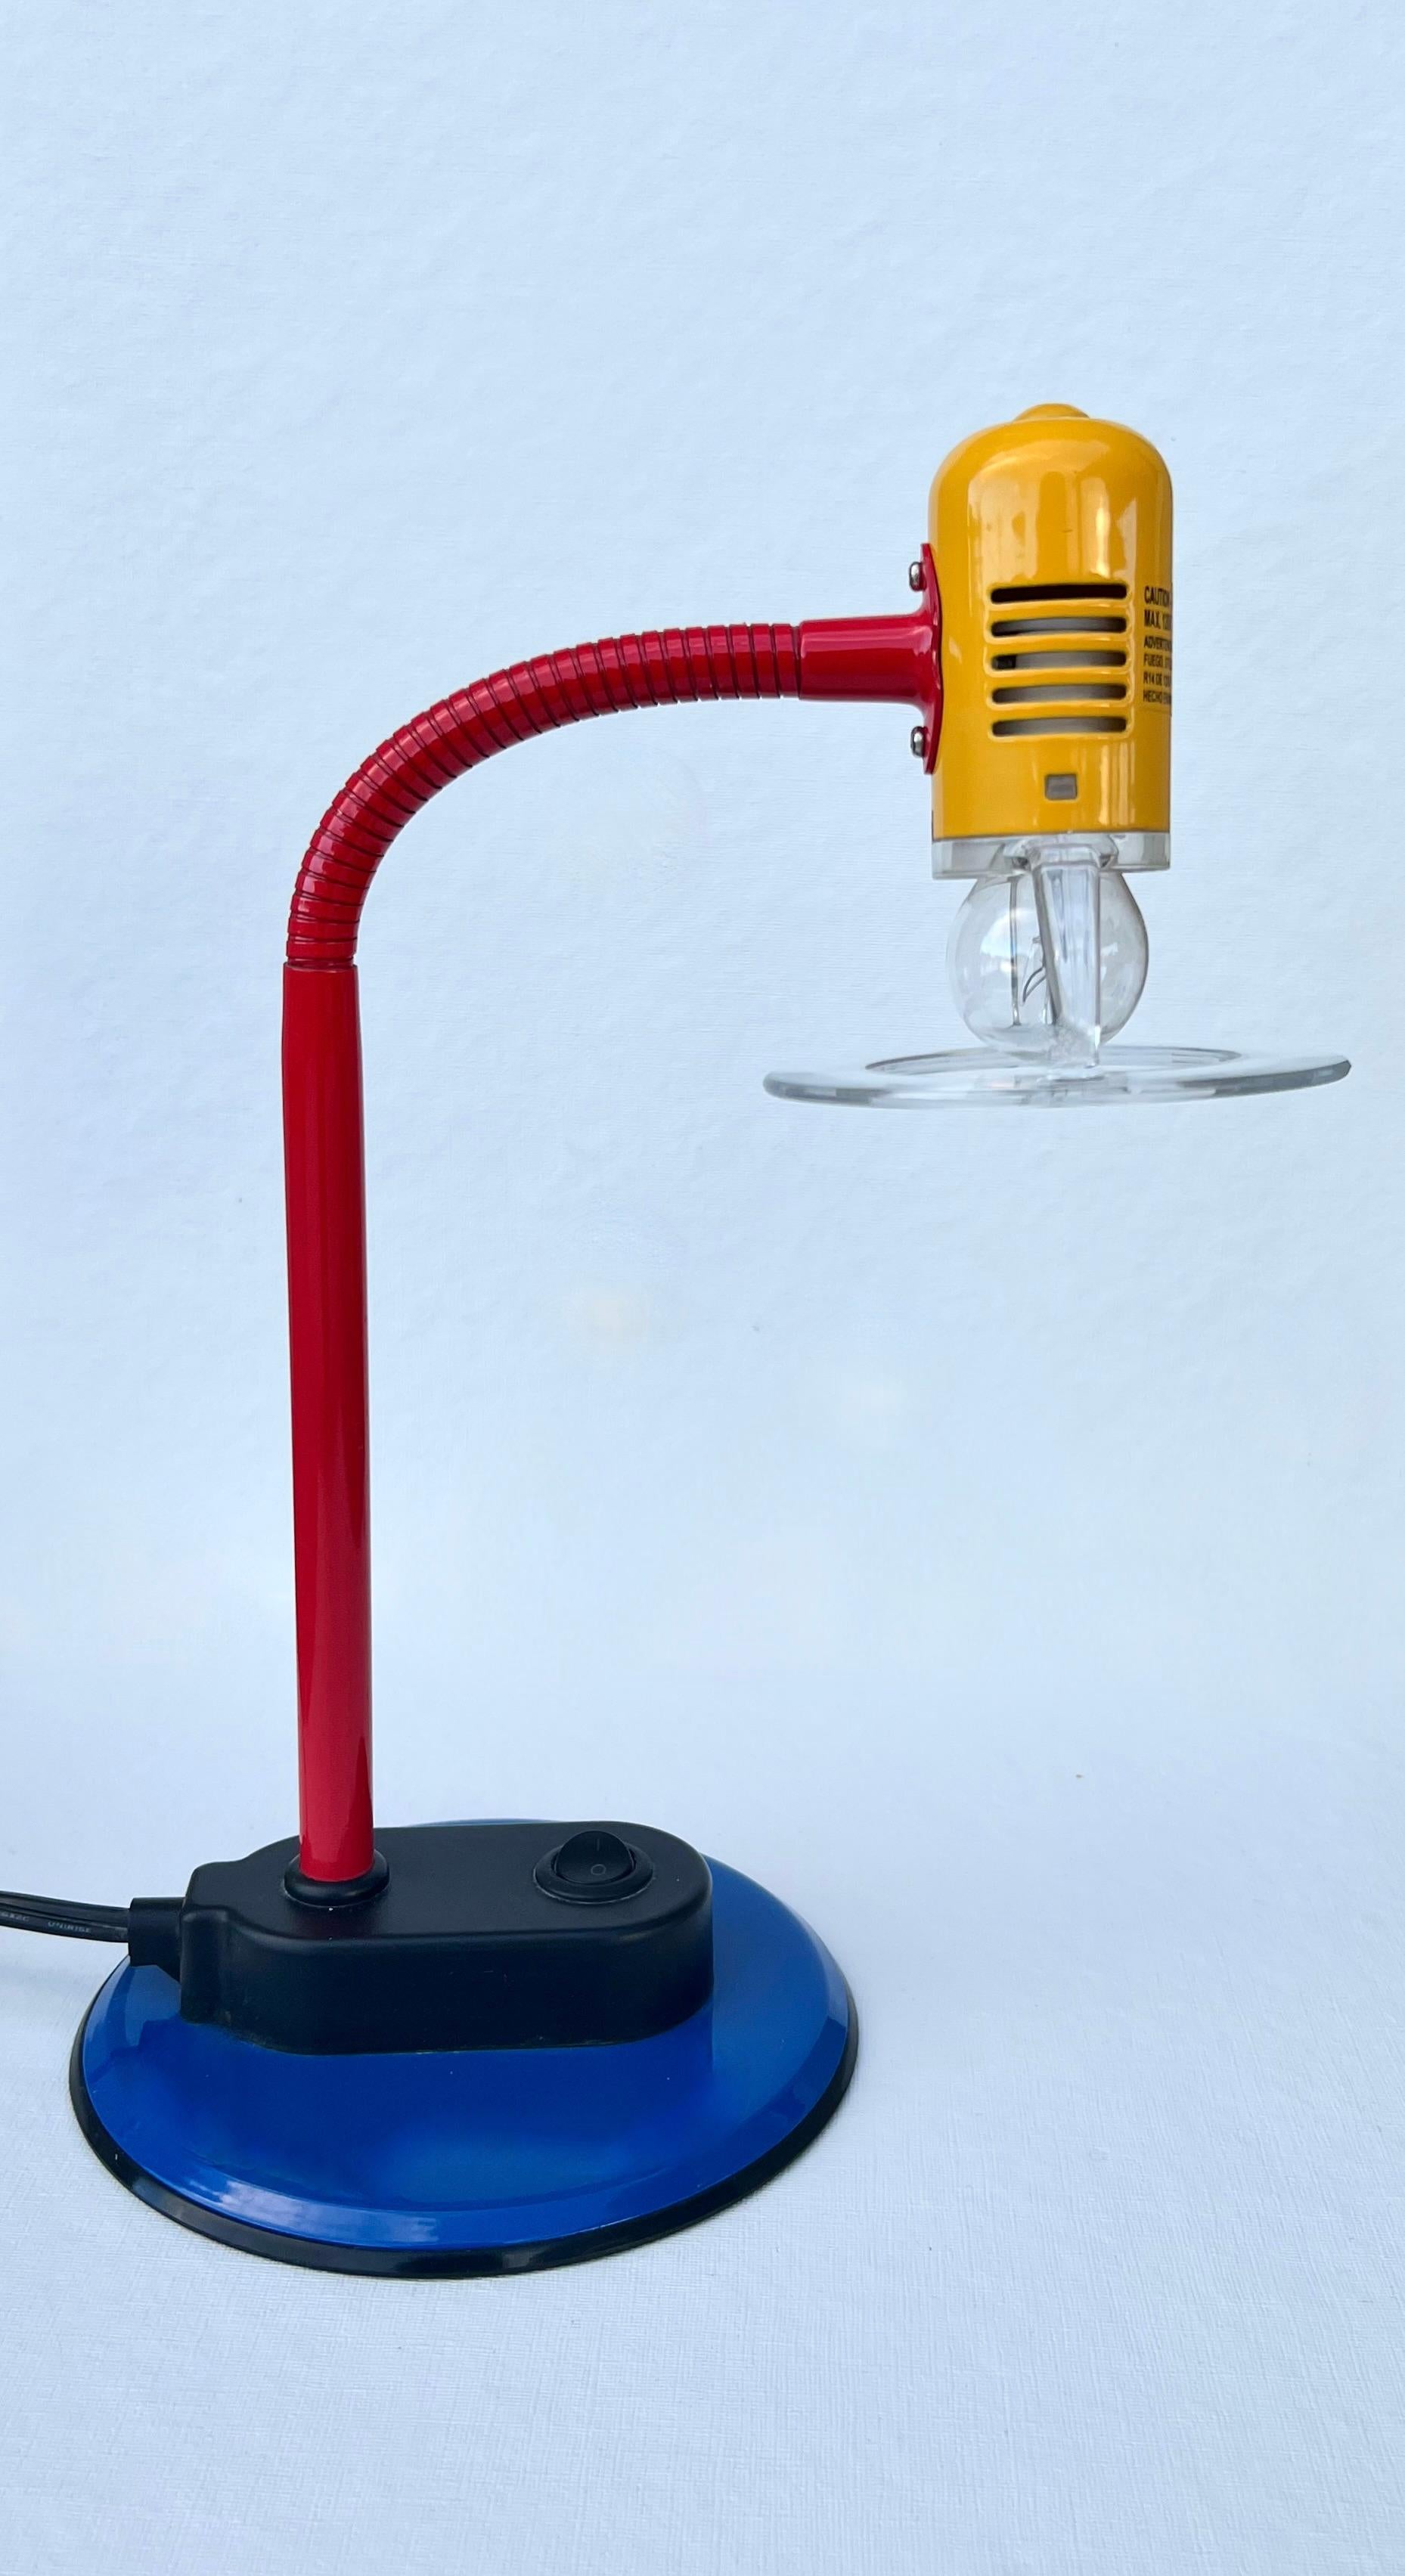 This is a rare, post-modern, 1980s Memphis-style gooseneck table lamp with a bright red, blue, and yellow lacquered metal frame and a plastic clear halo shade. It has a fully adjustable gooseneck that can be positioned according to your preference.